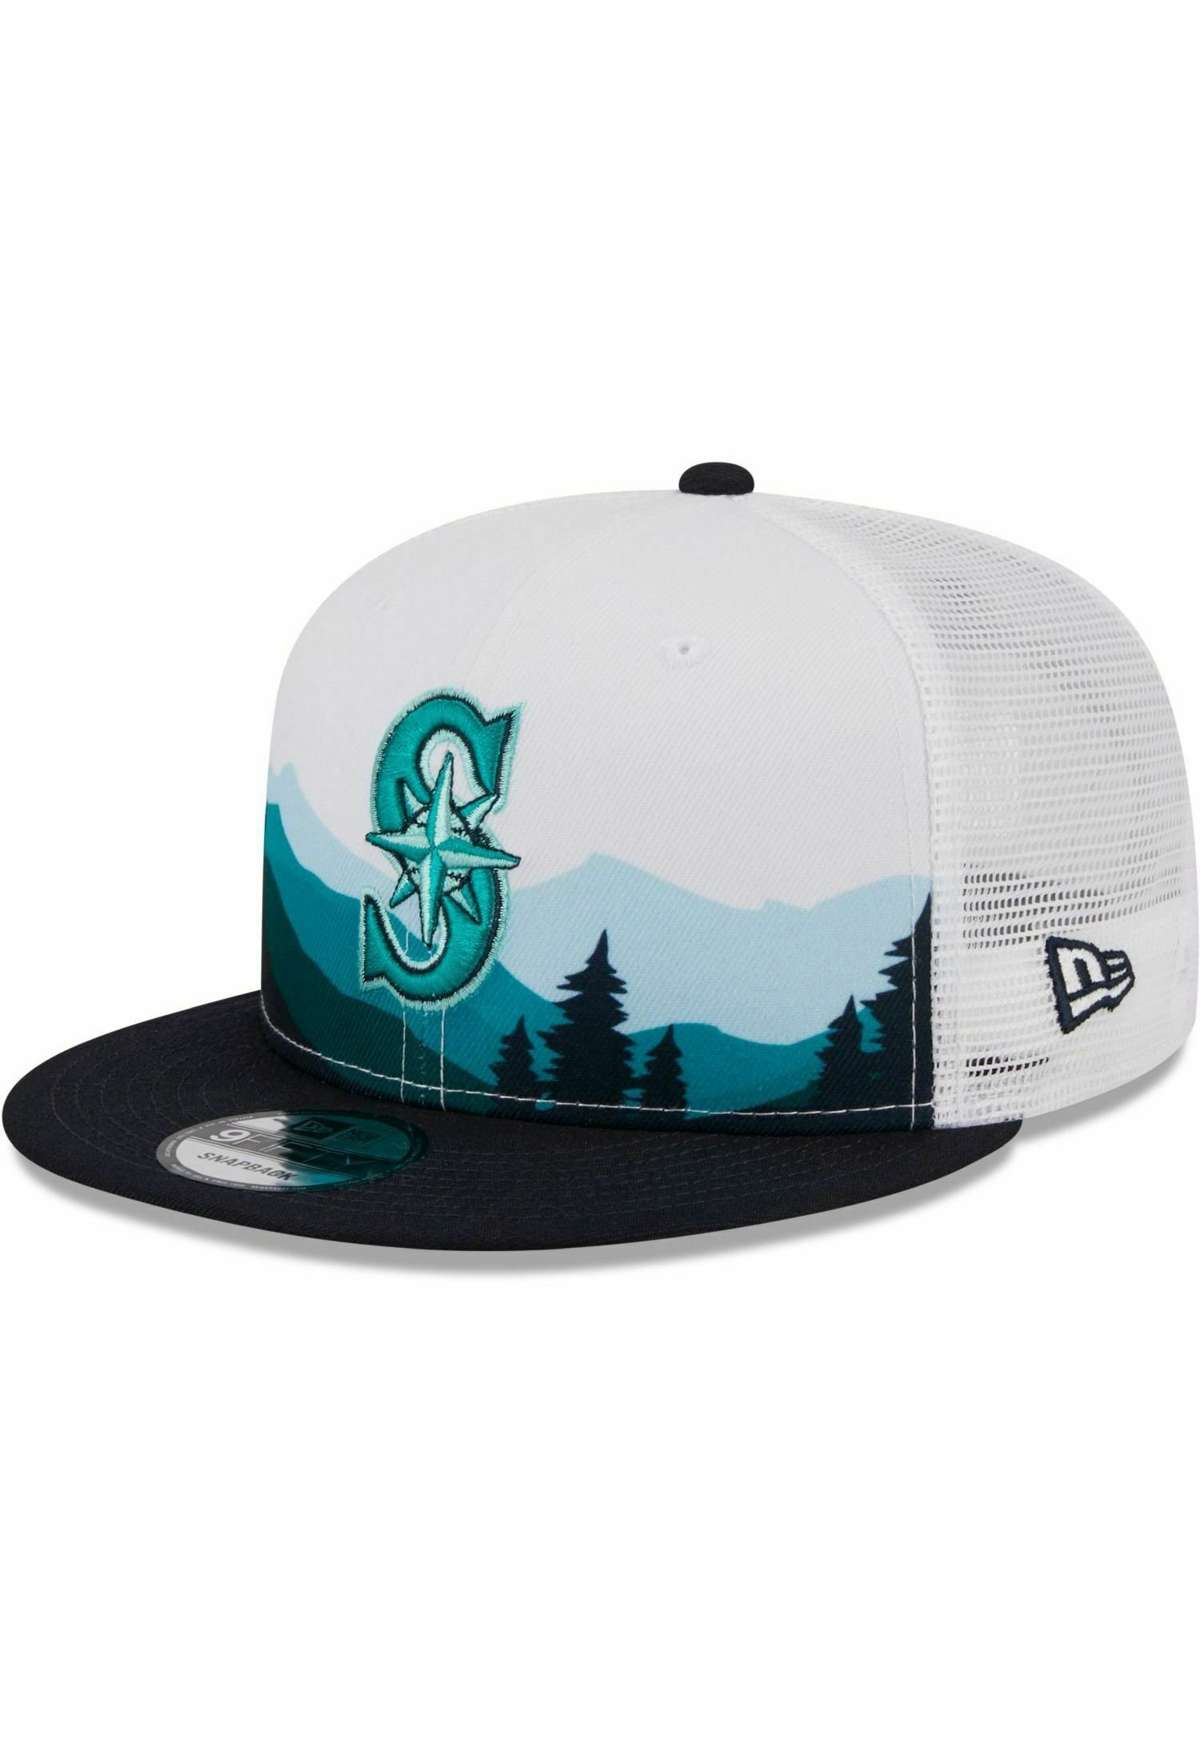 Кепка 9FIFTY ALLSTAR GAME SEATTLE MARINERS